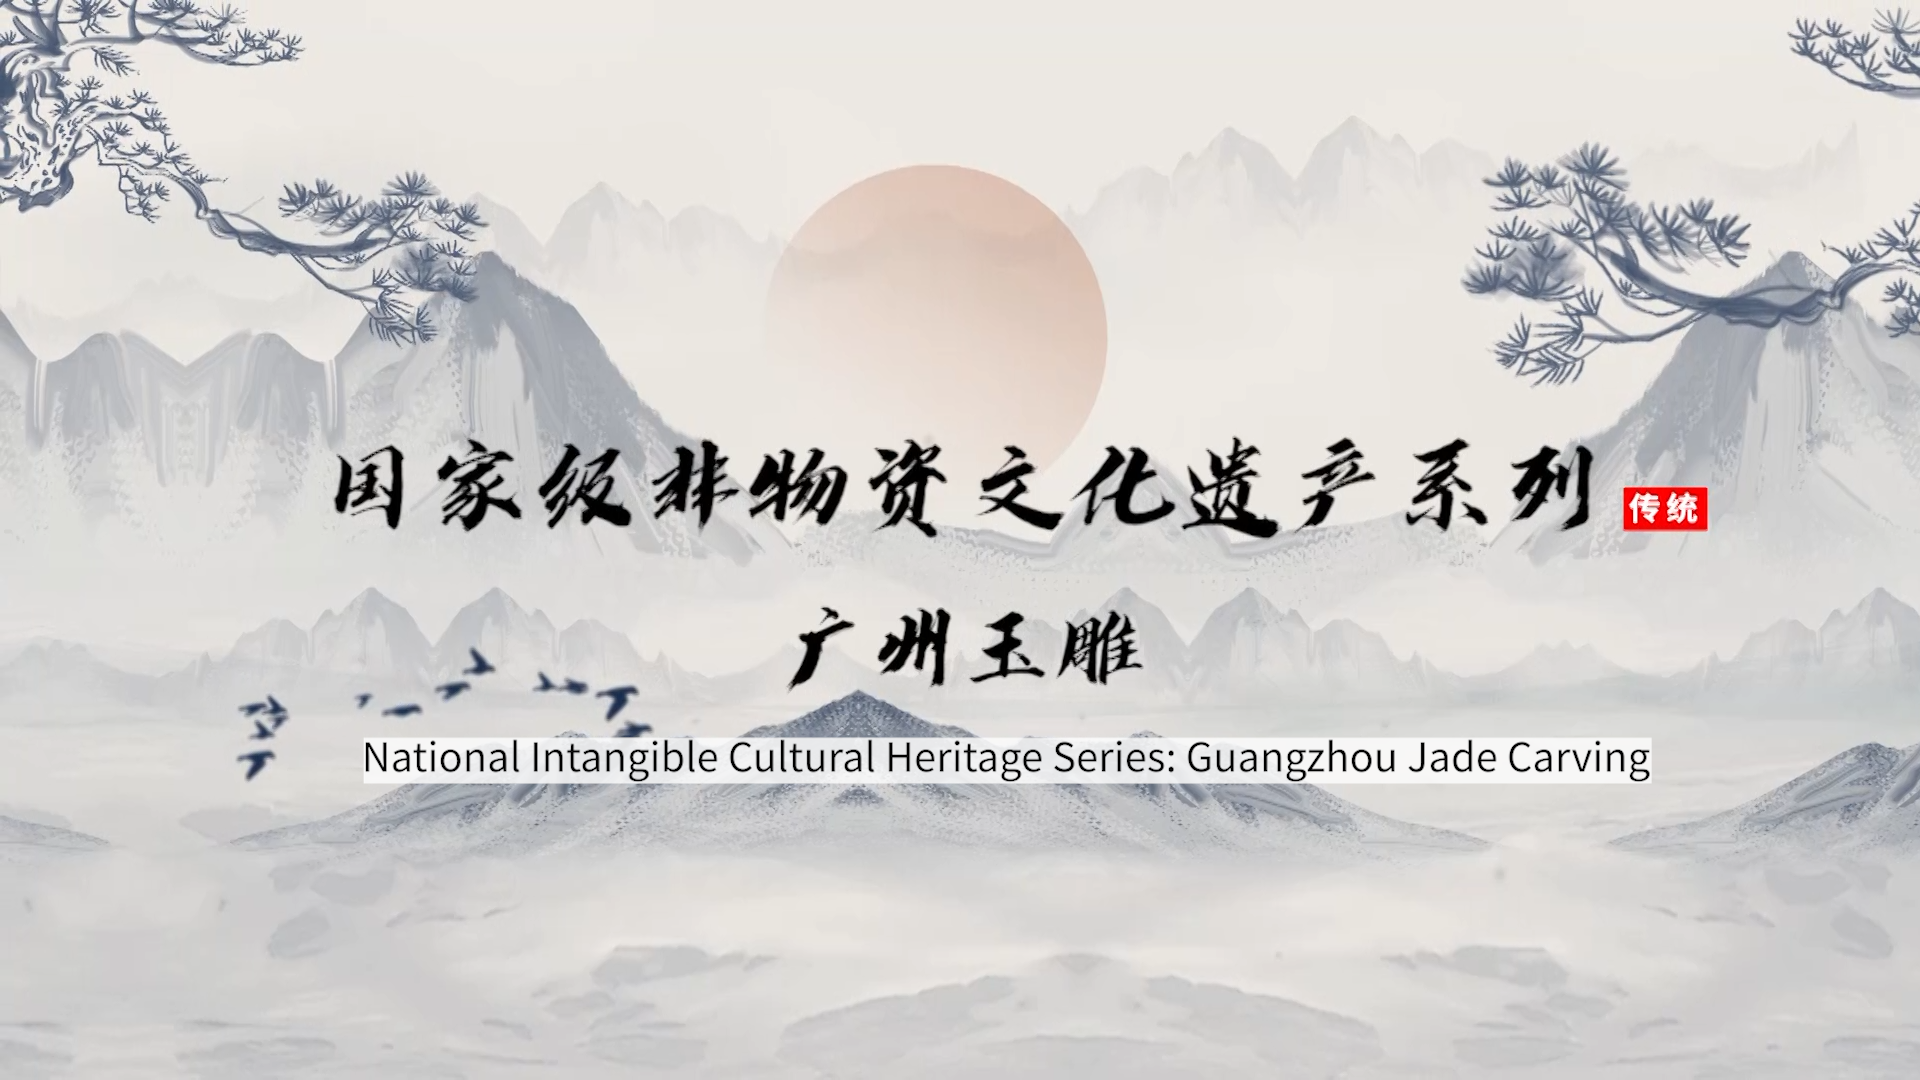 National Intangible Cultural Heritage Series Guangzhou Jade Carving